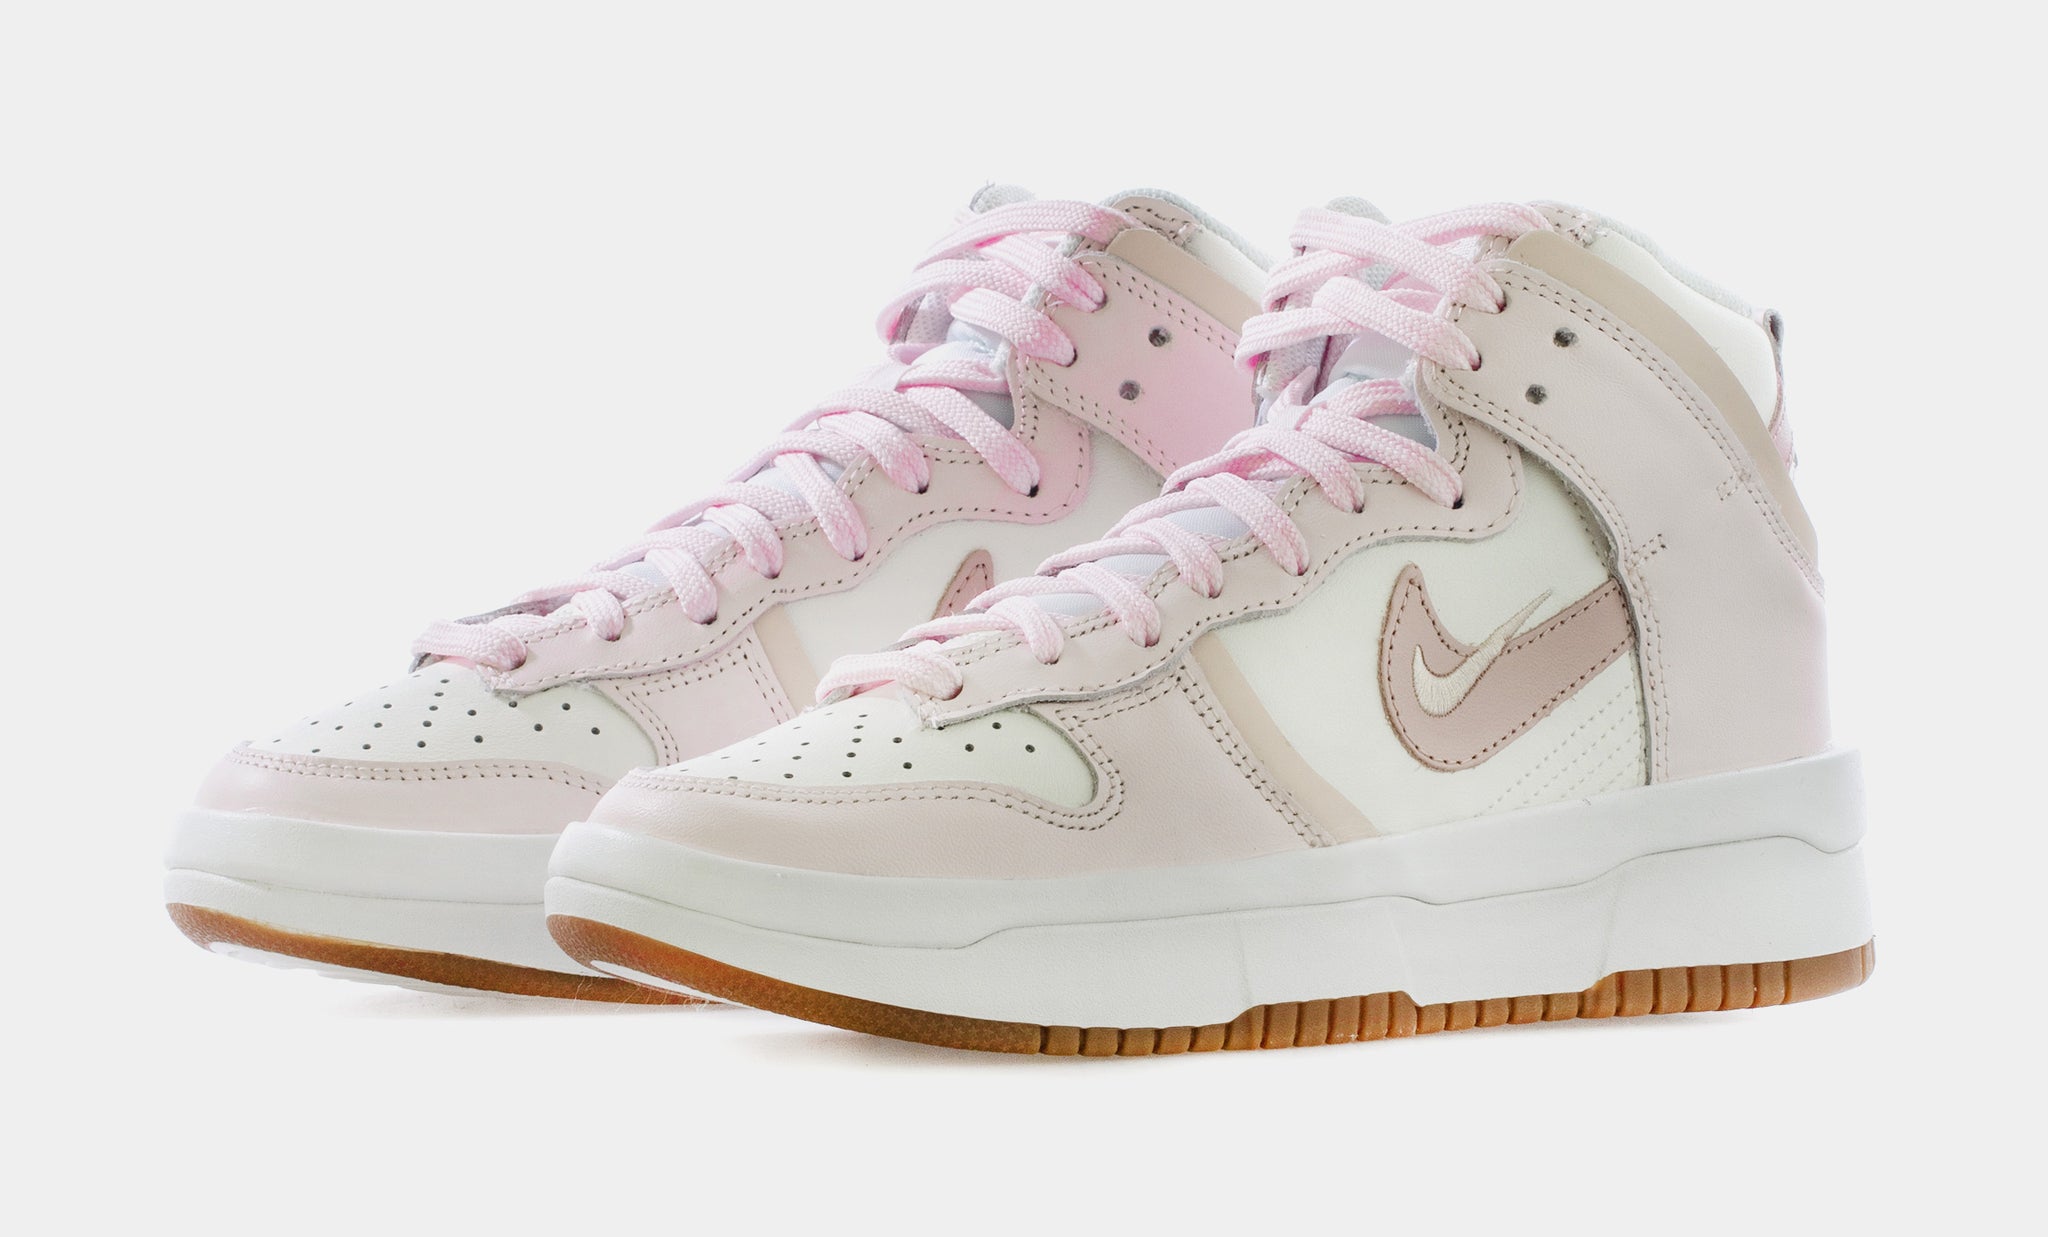 Nike Dunk High Rebel Pink Oxford Womens Lifestyle Shoes Pink Beige ...